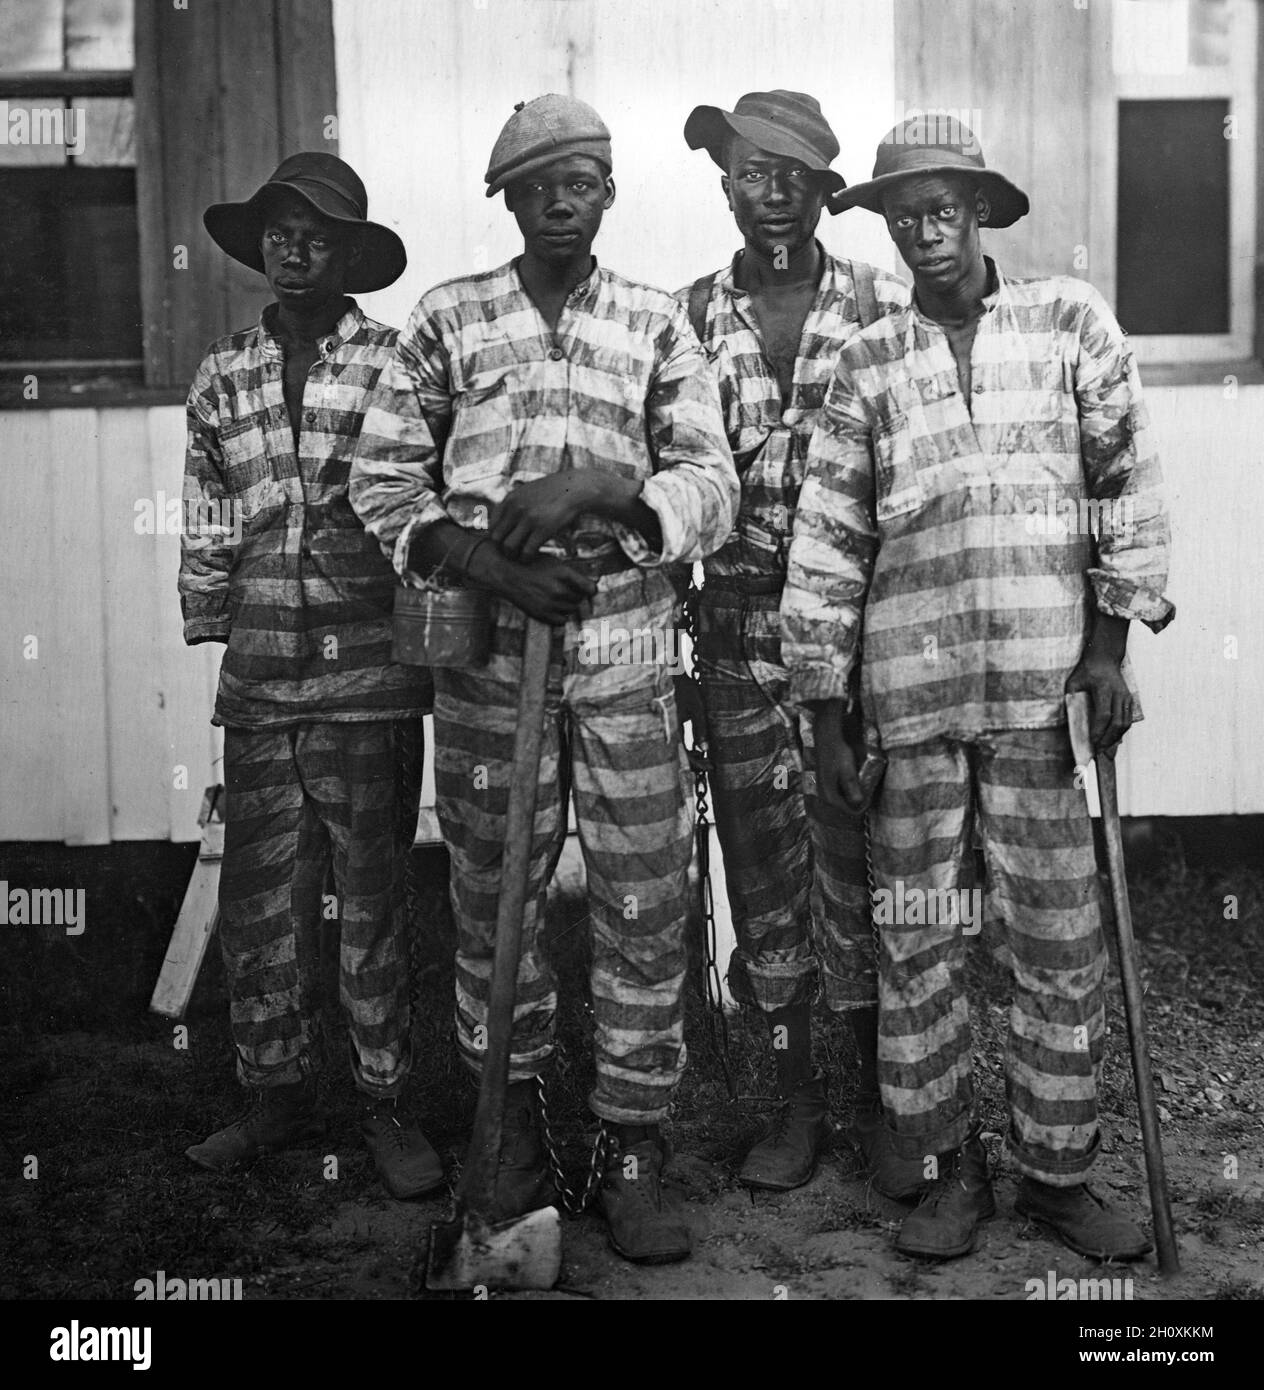 Vintage photo circa 1915 of African American convicts wearing leg shackles and striped prison uniforms leased to harvest timber in Florida.  Jim Crow racial restrictions were enforced by the harsh penal system employed in the Southern states. In exchange for kickbacks or bribes convict labour was used to reduce costs for farmers, construction companies and lumber companies Stock Photo